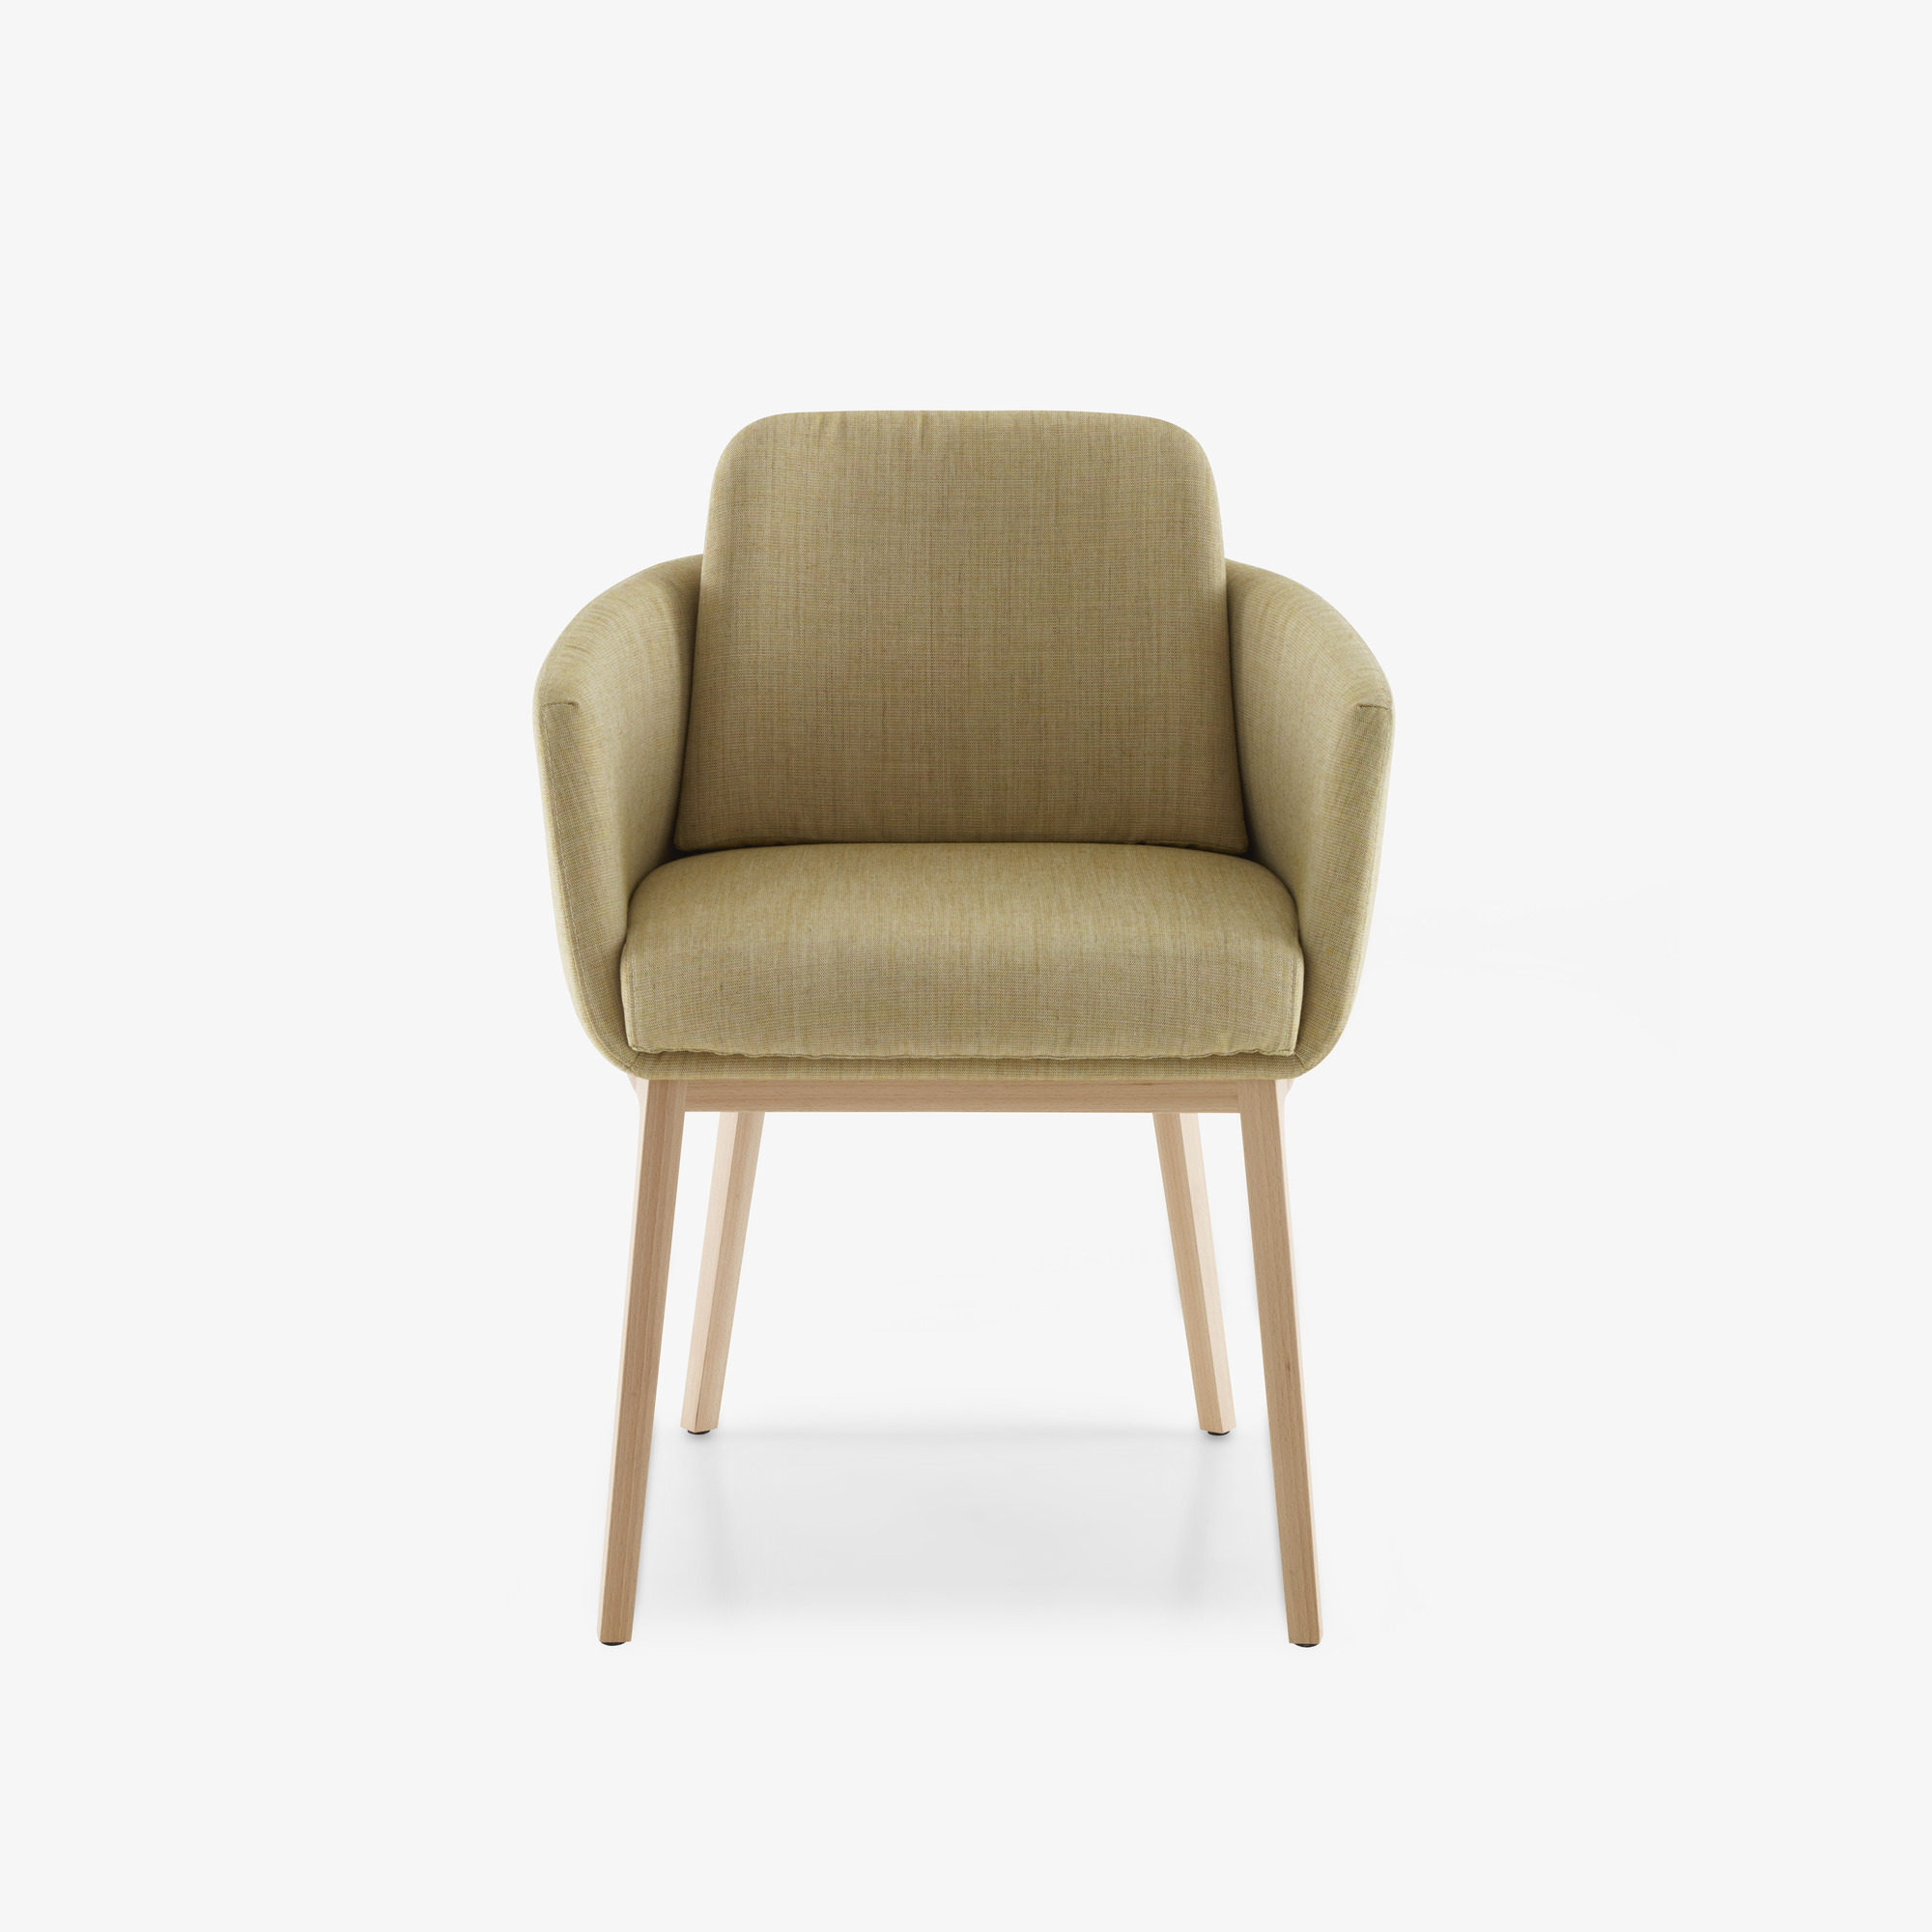 Image CHAIR WITH ARMS WOODEN BASE